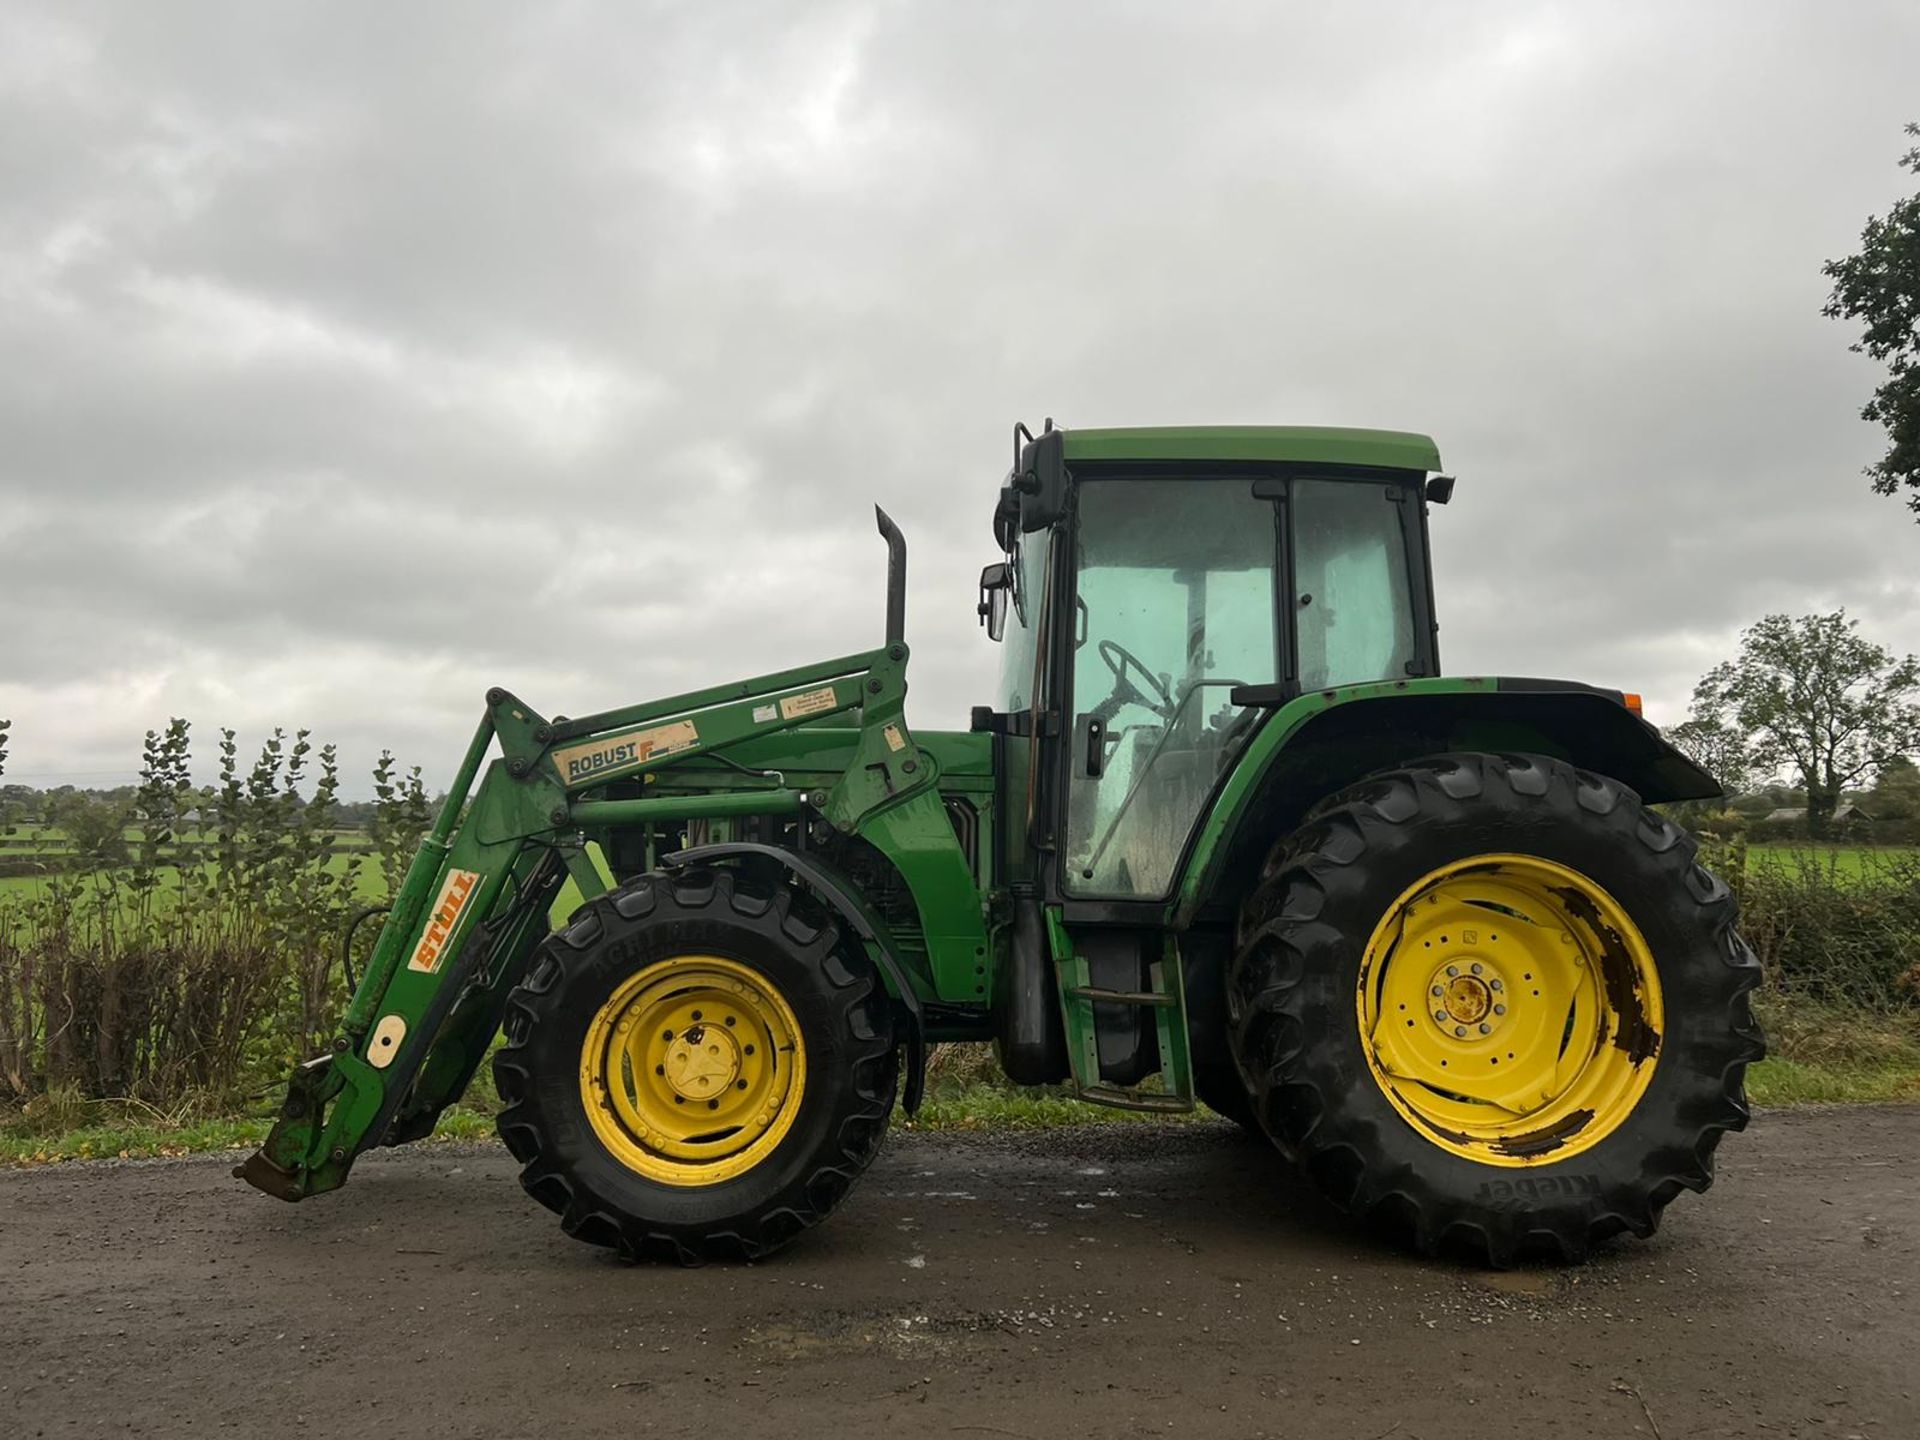 2003 JOHN DEERE 6310 99hp 4WD TRACTOR WITH STROLL FRONT LOADER, RUNS DRIVES AND WORKS *PLUS VAT* - Image 5 of 18